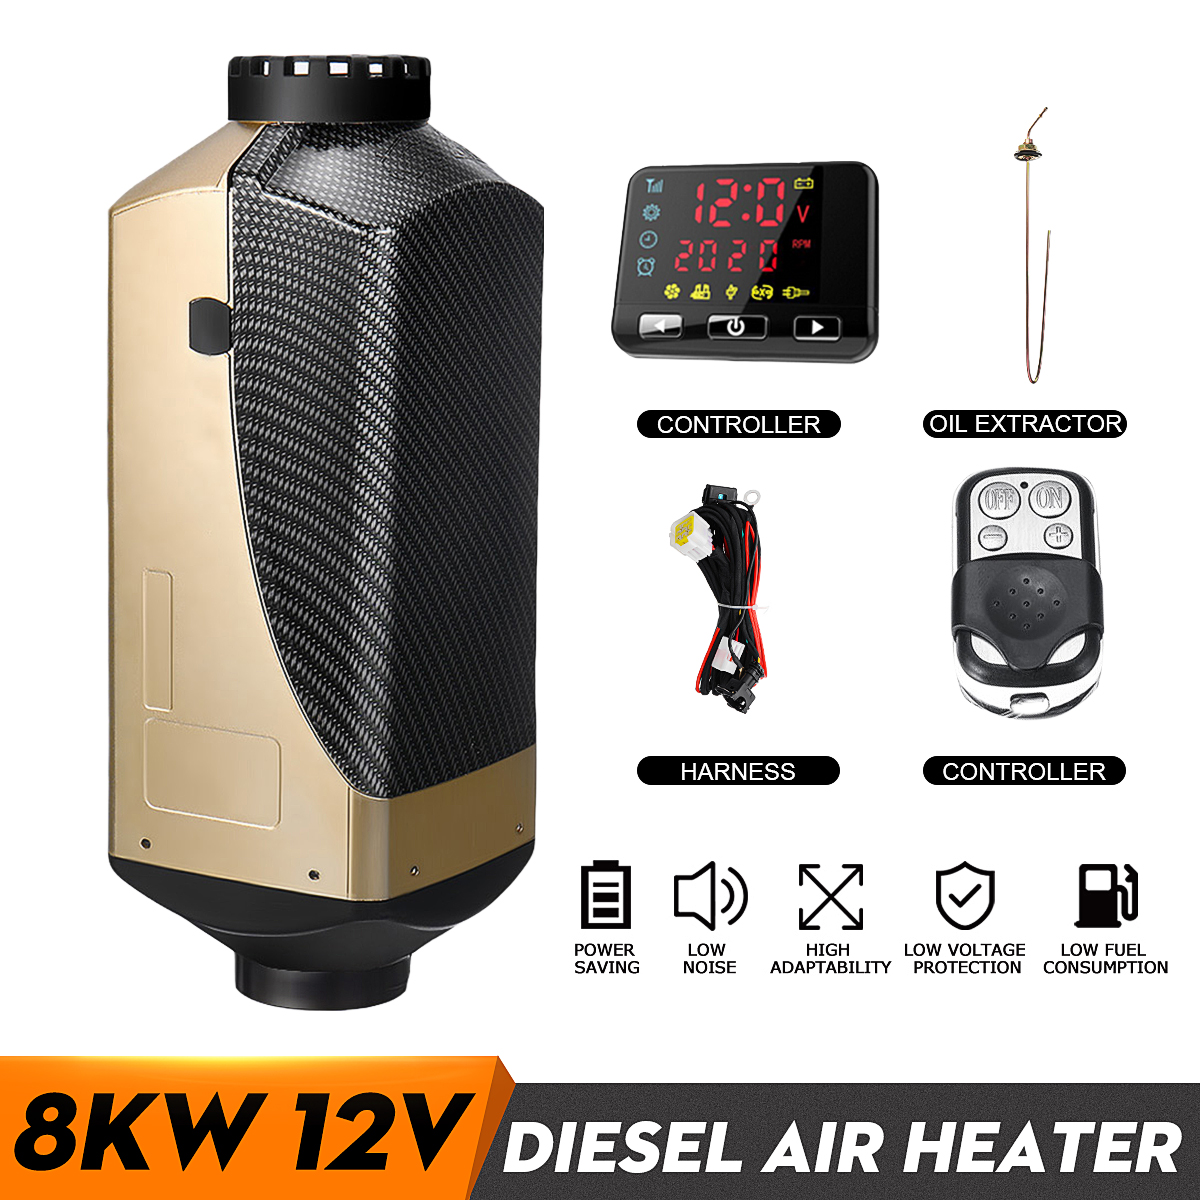 

12V 8KW Diesel Air Heater Car Parking Heater LCD Display Remote Control with Accessories Kit